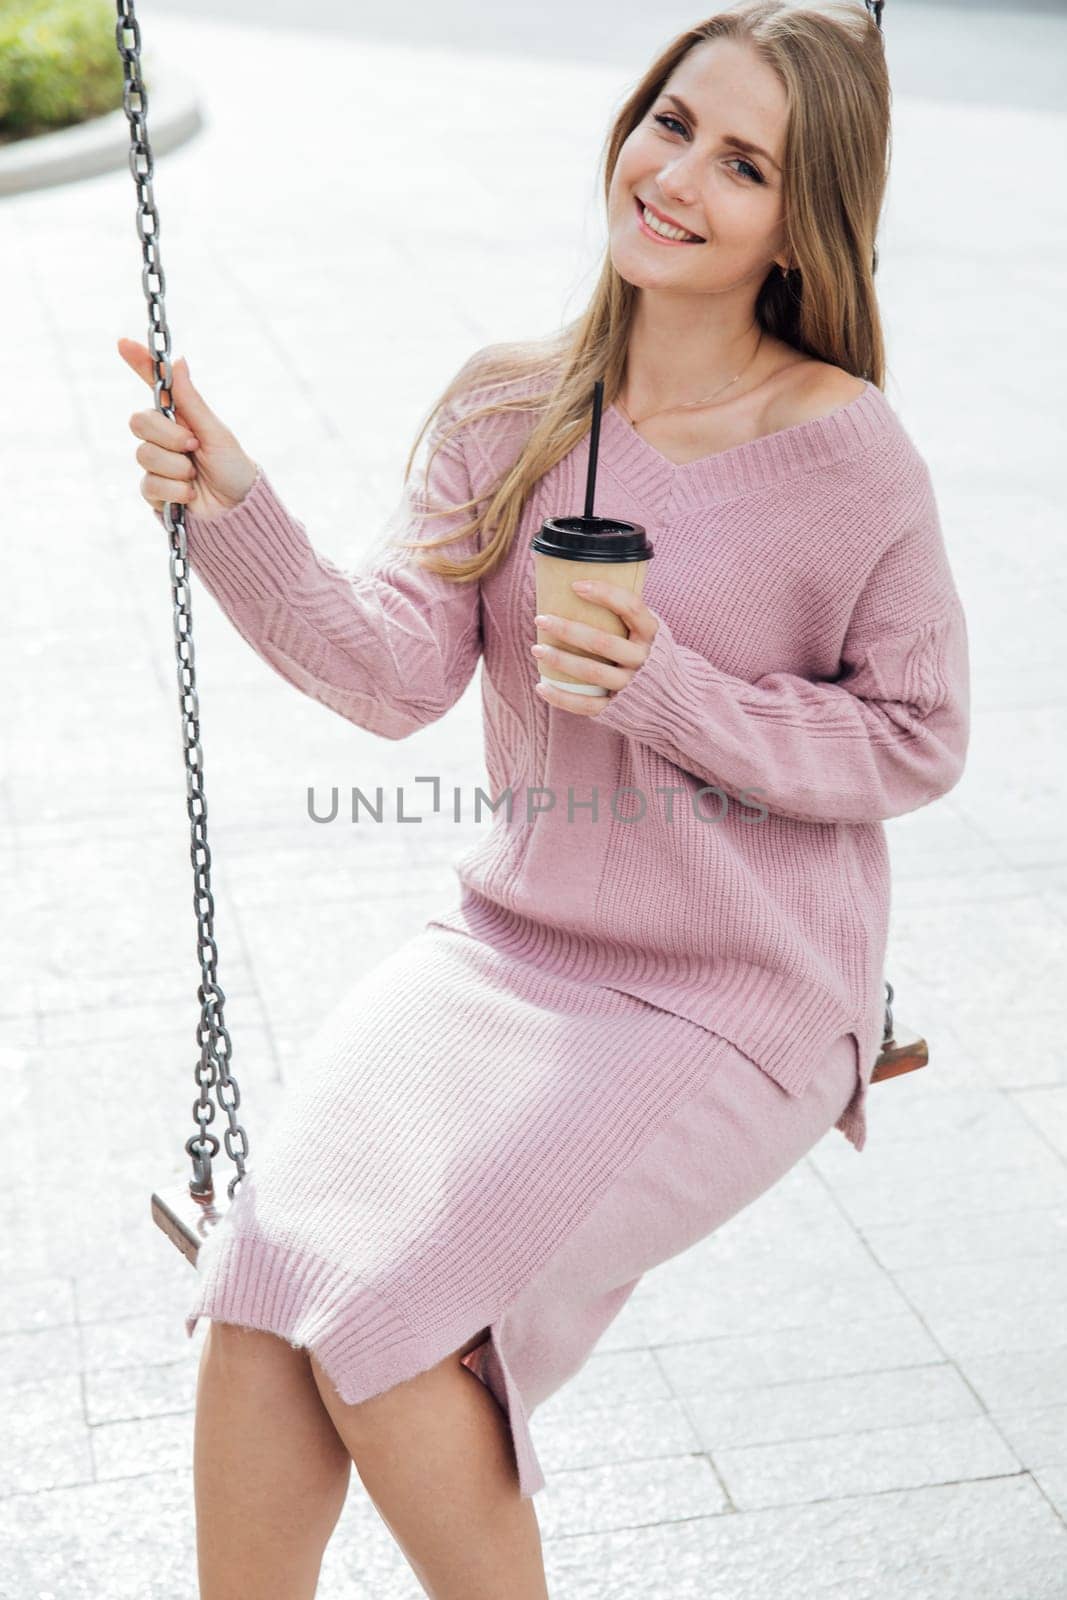 fashionable woman with a cup rides on a swing by Simakov